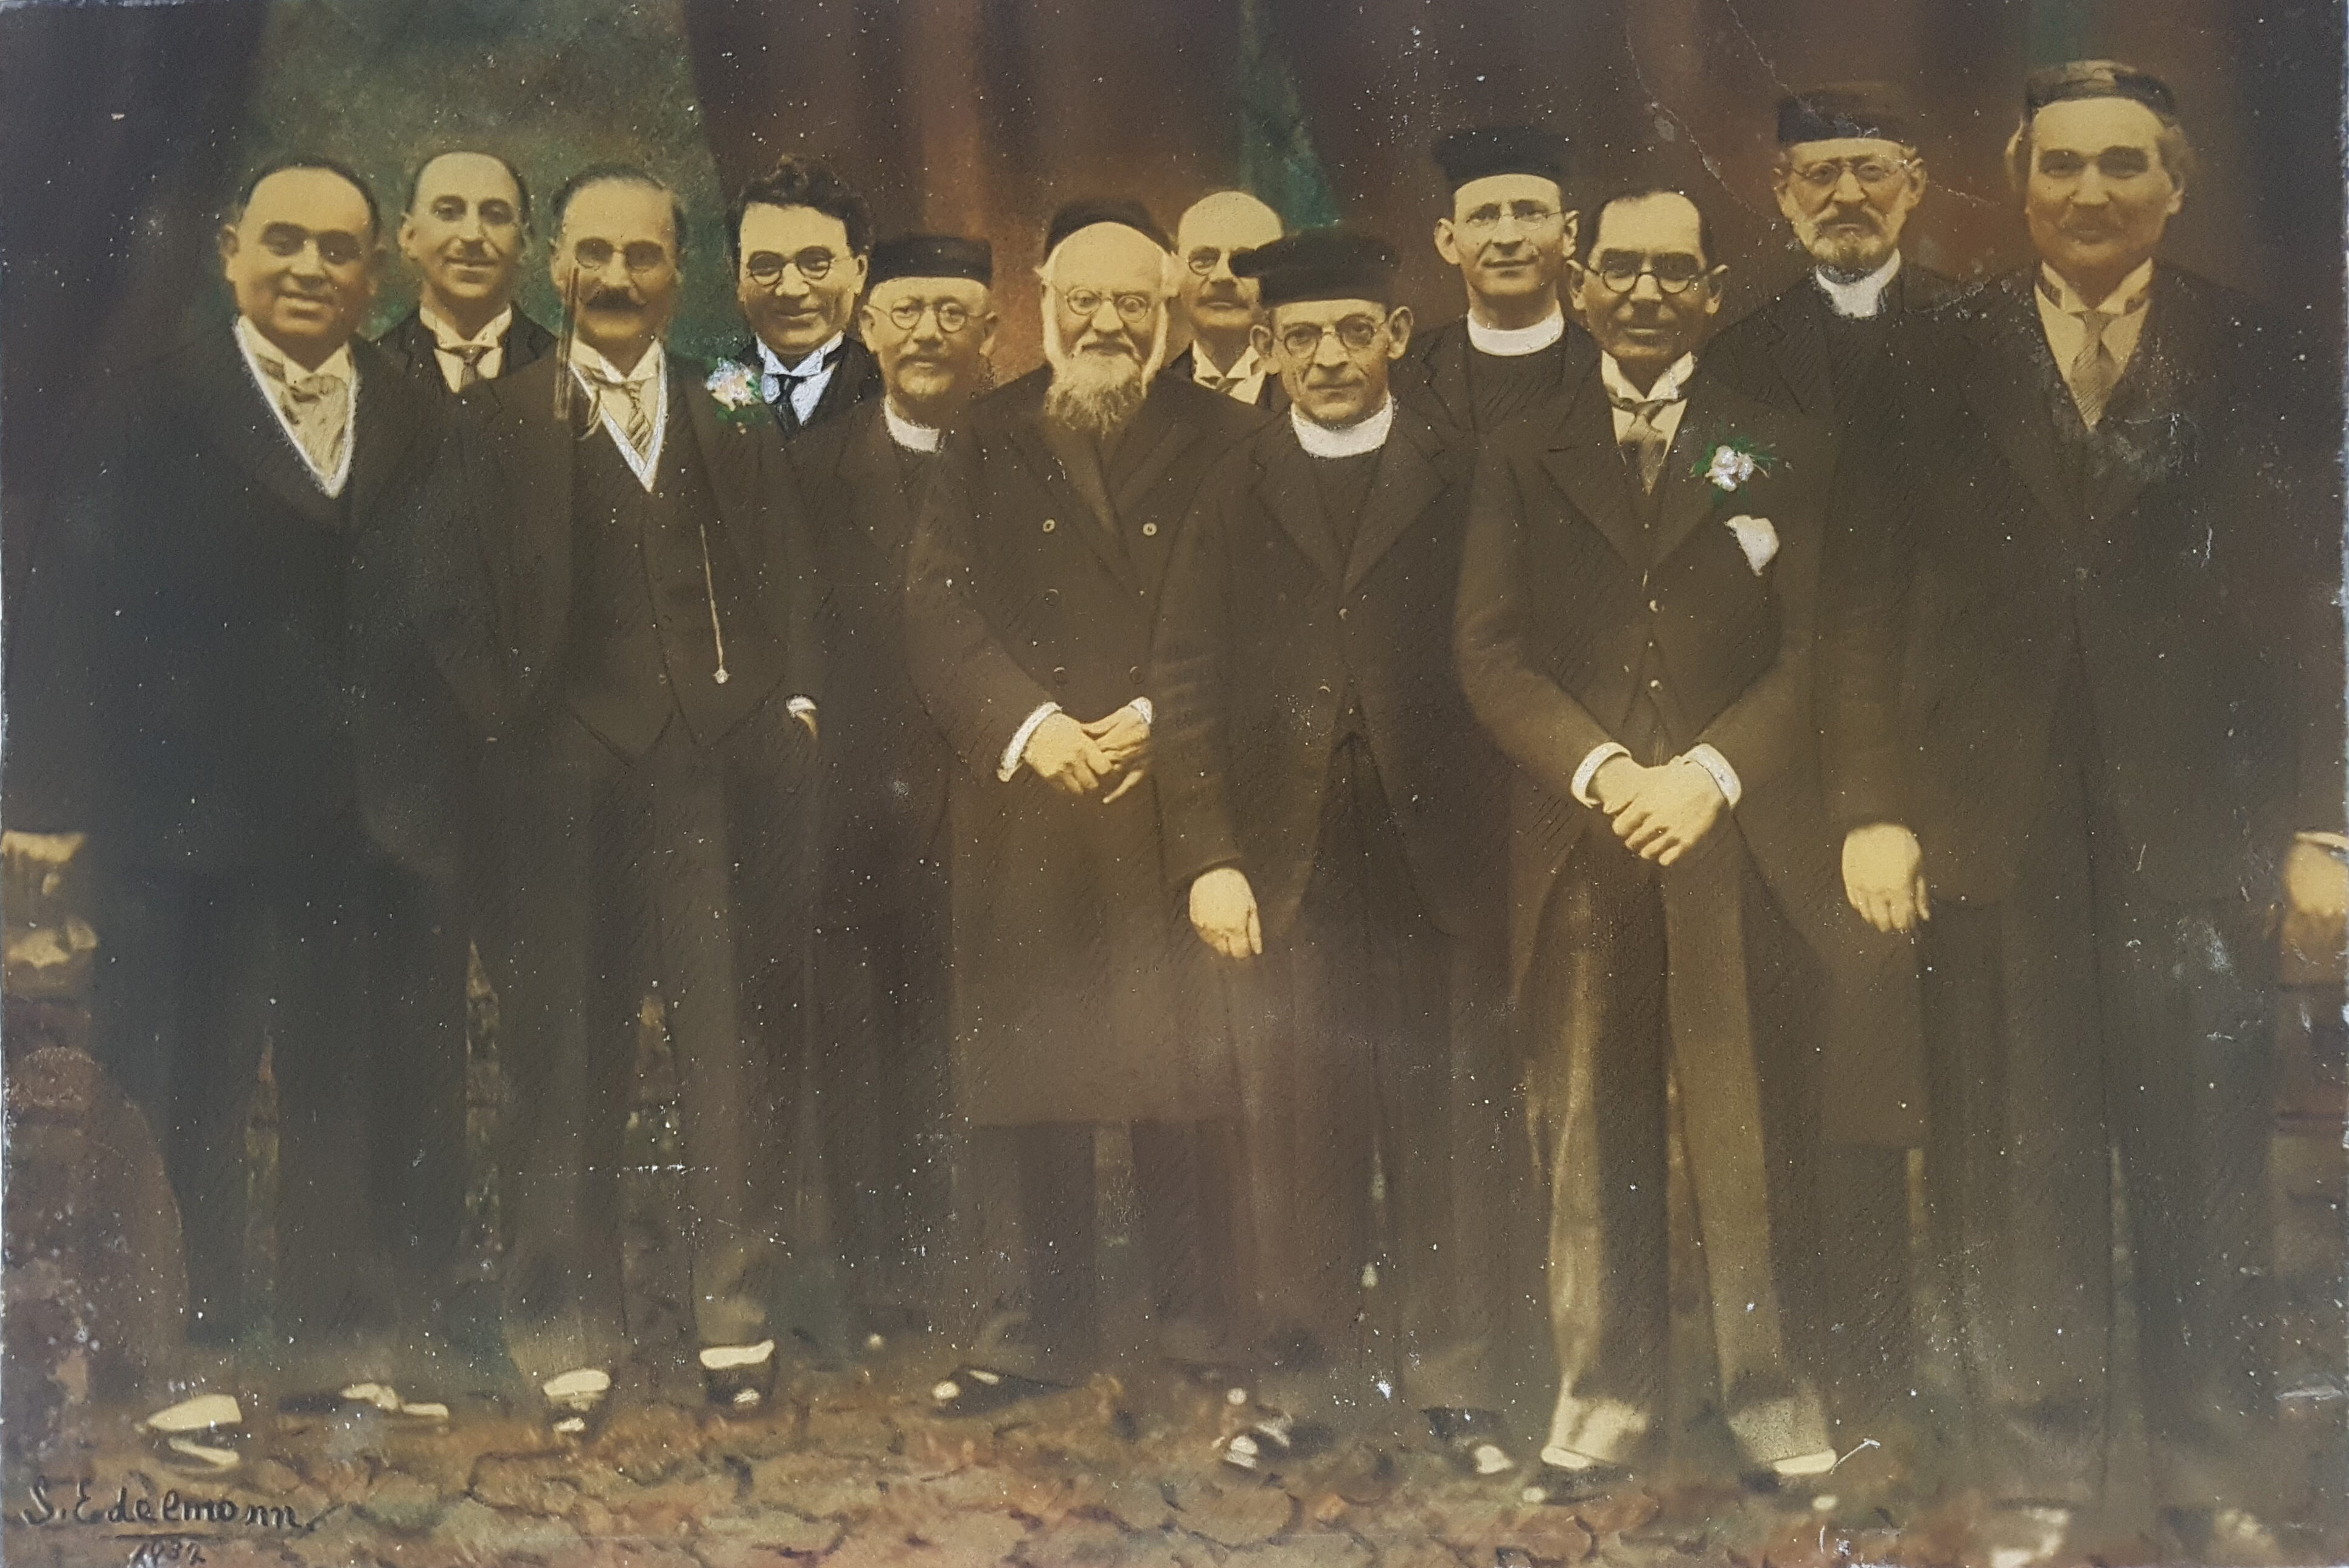 Background Image showing a group of jewish men